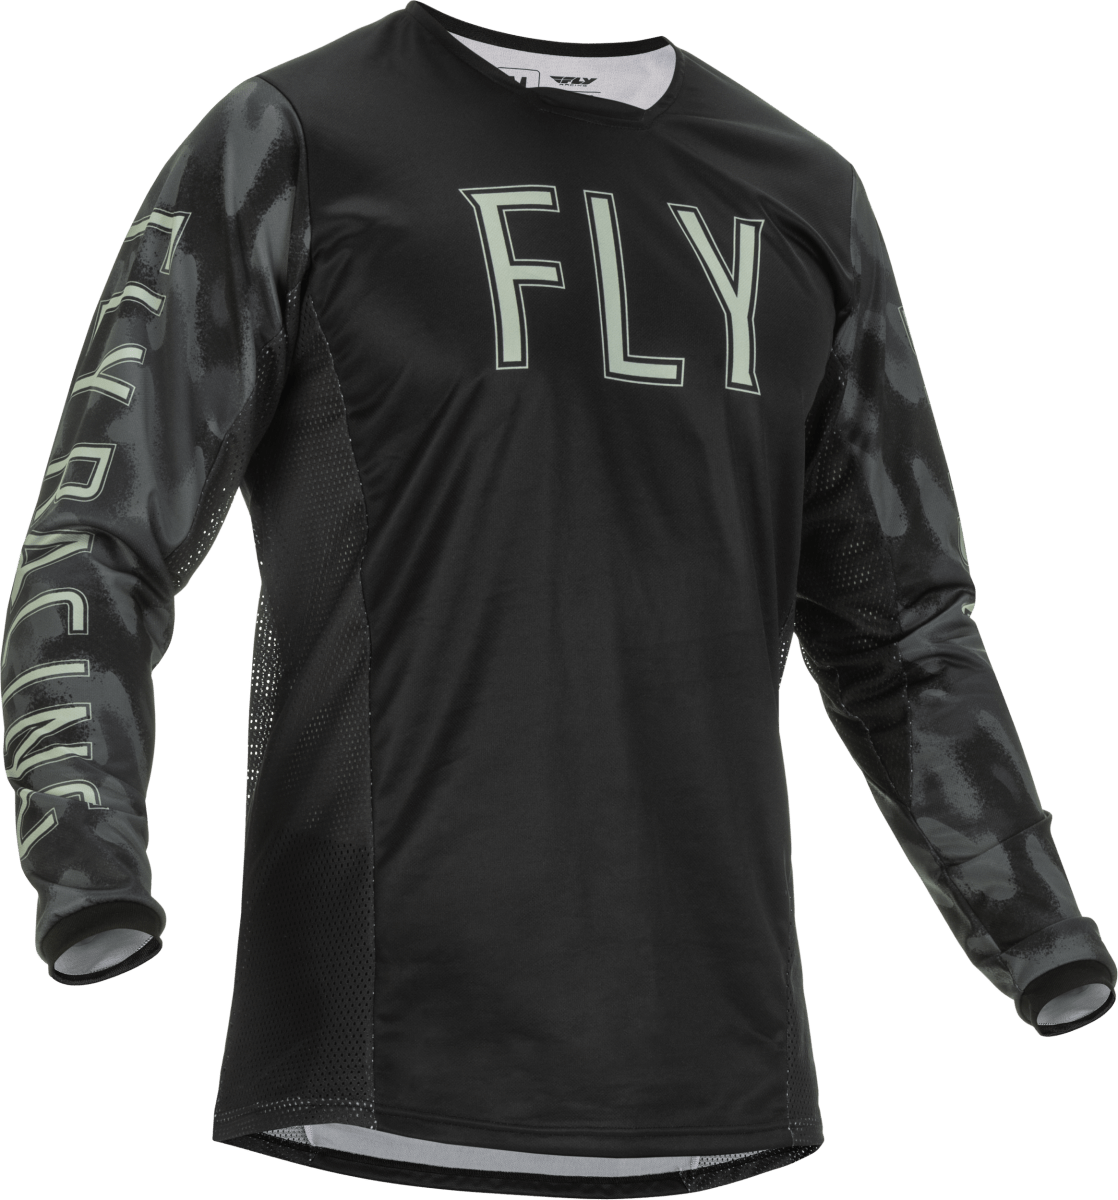 FLY RACING - KINETIC S.E. TACTIC JERSEY - 375-5242X - 191361288944